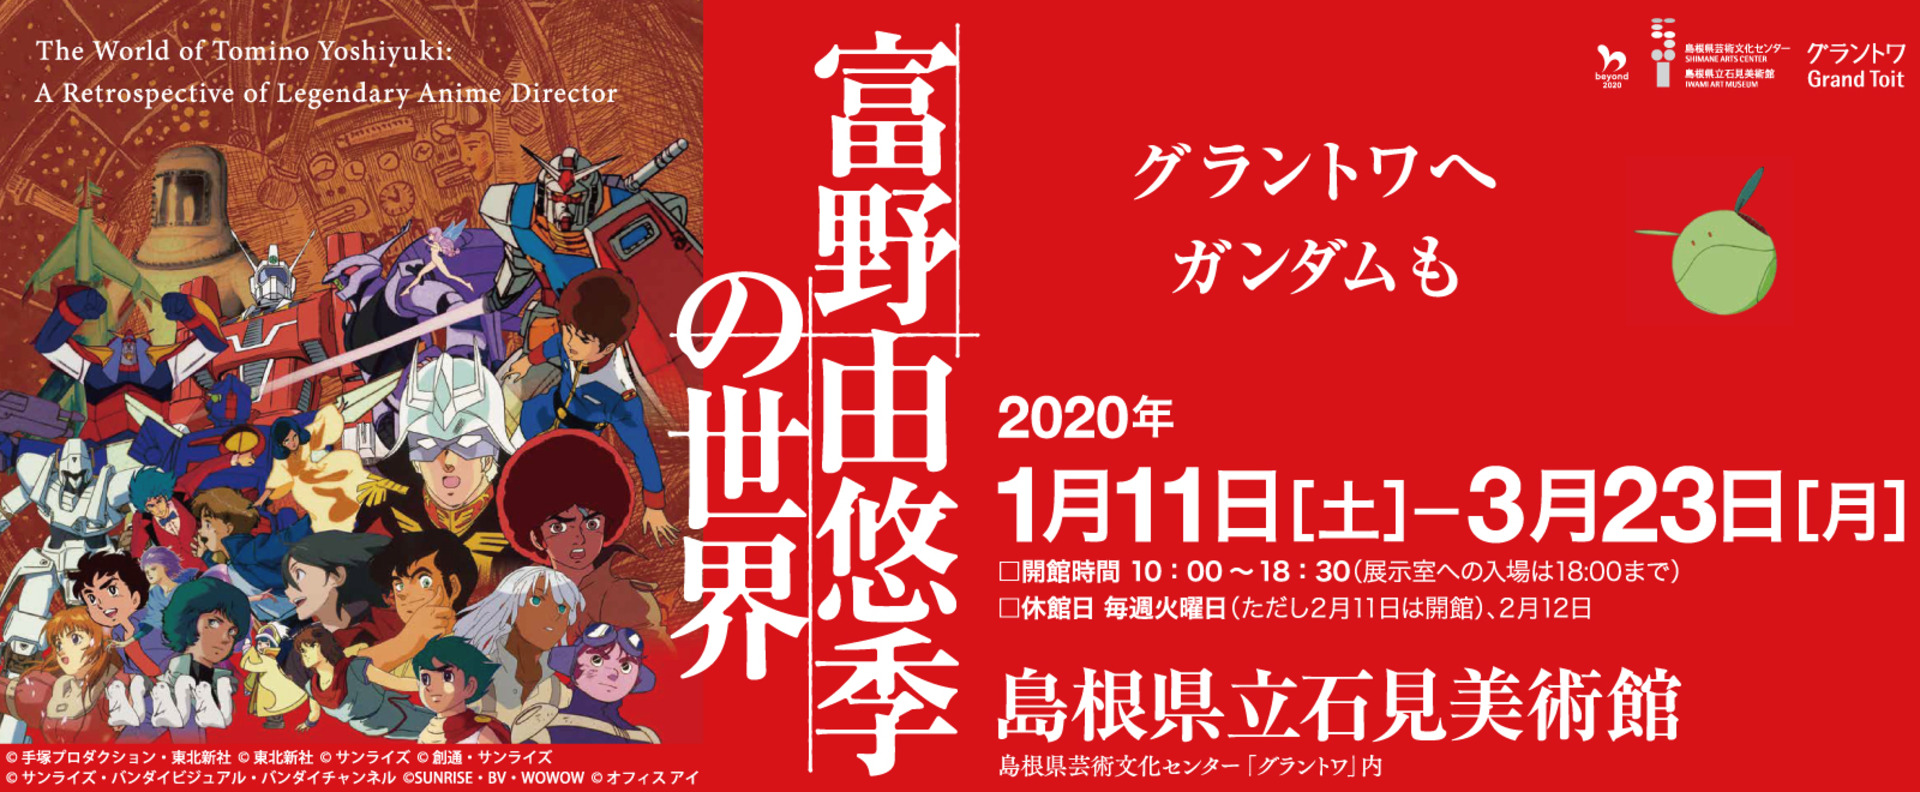 1920x banner tomino exhibition2